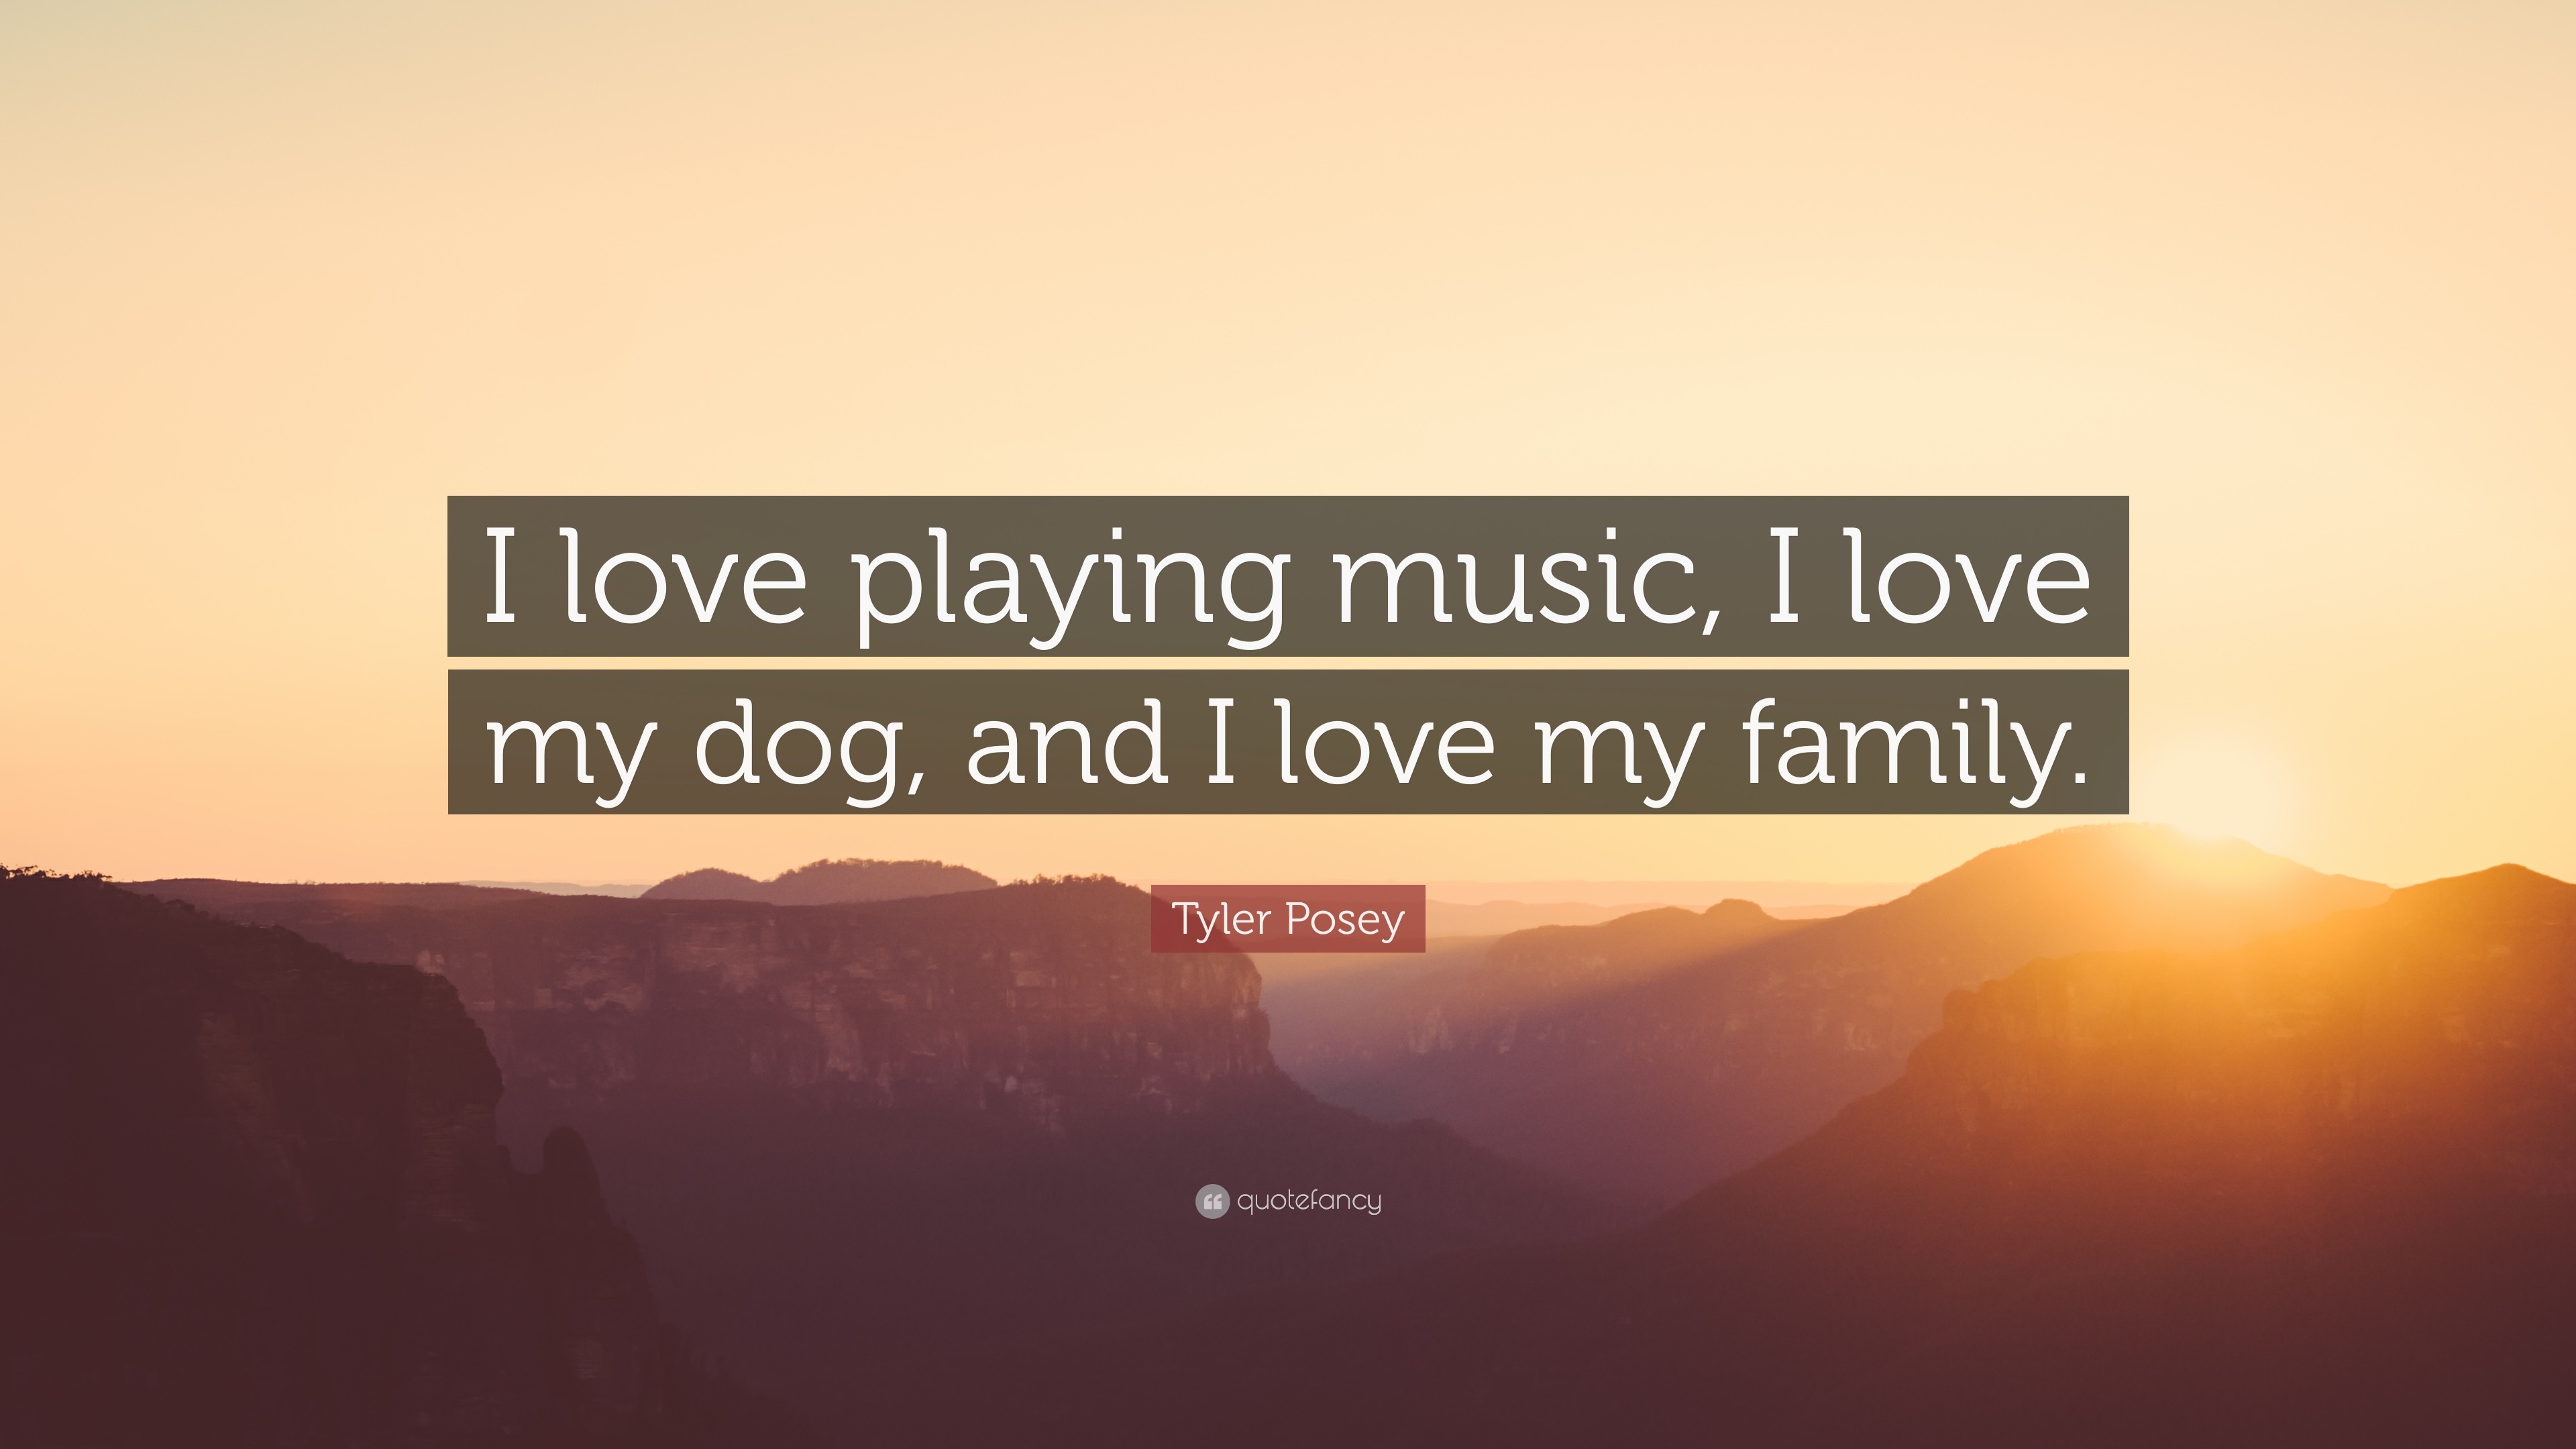 3840x2160 Tyler Posey Quote: “I love playing music, I love my dog, and